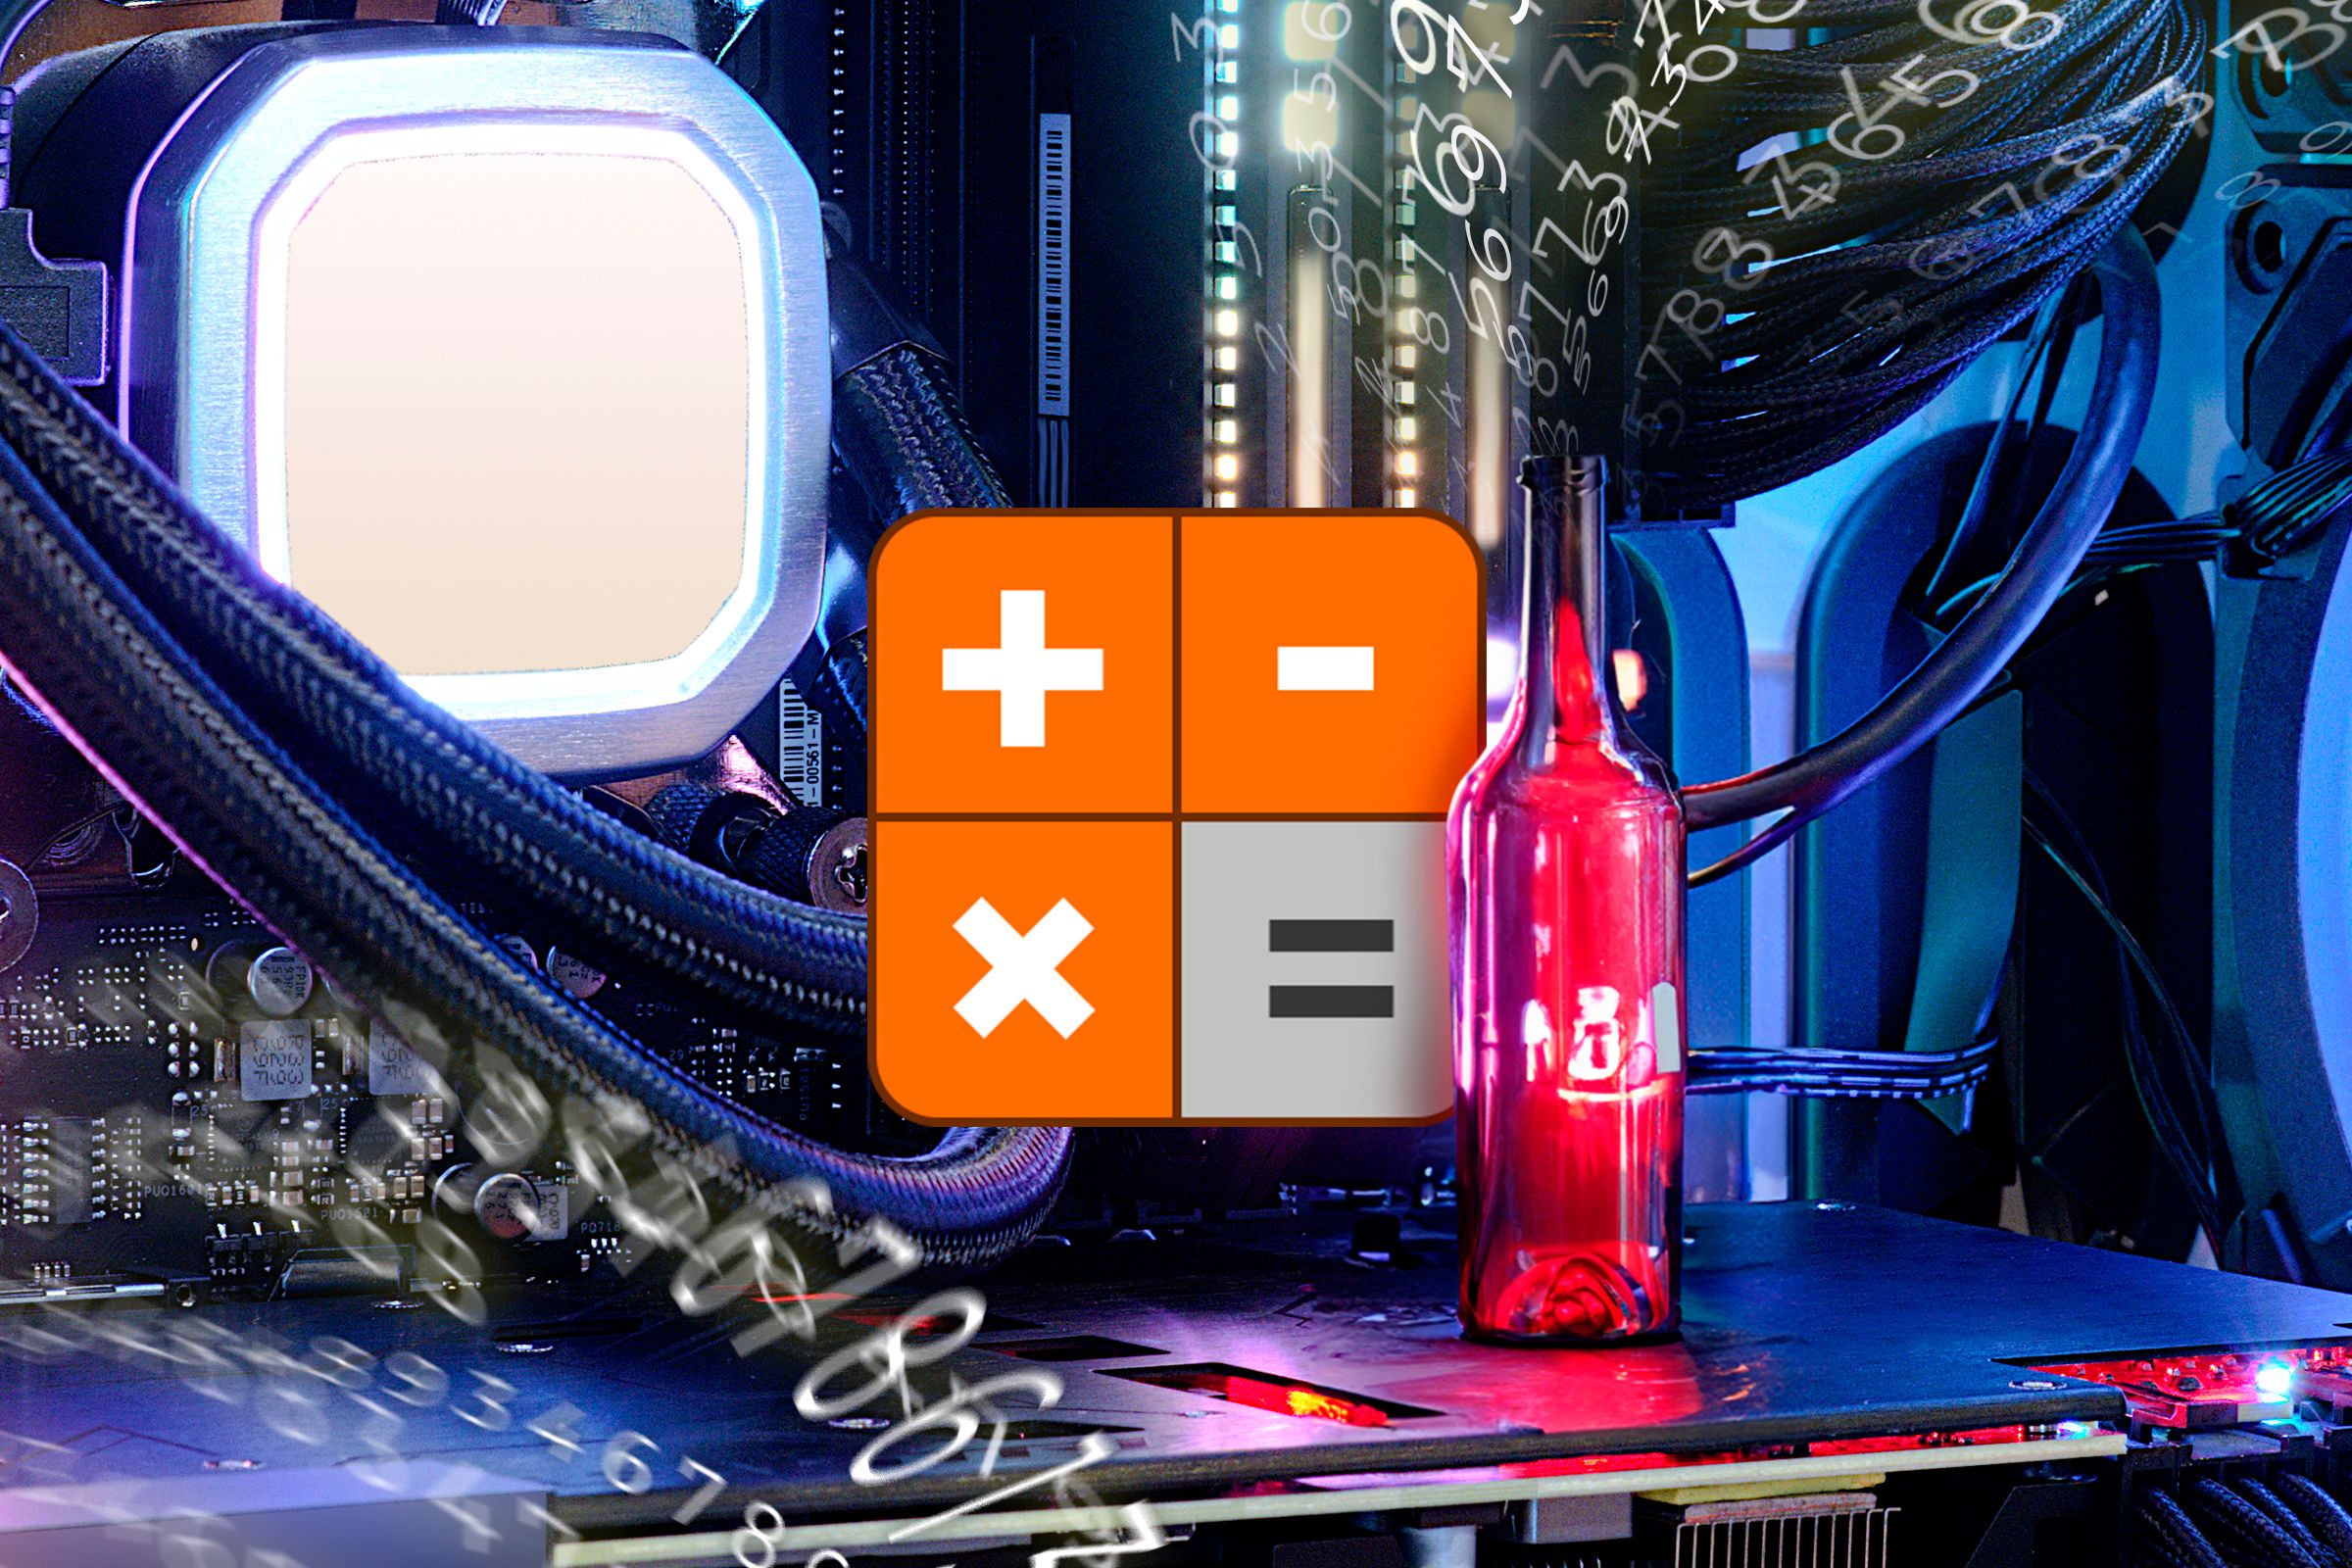 Close-up and inside of a Desktop PC with a bottle and a calculator icon.